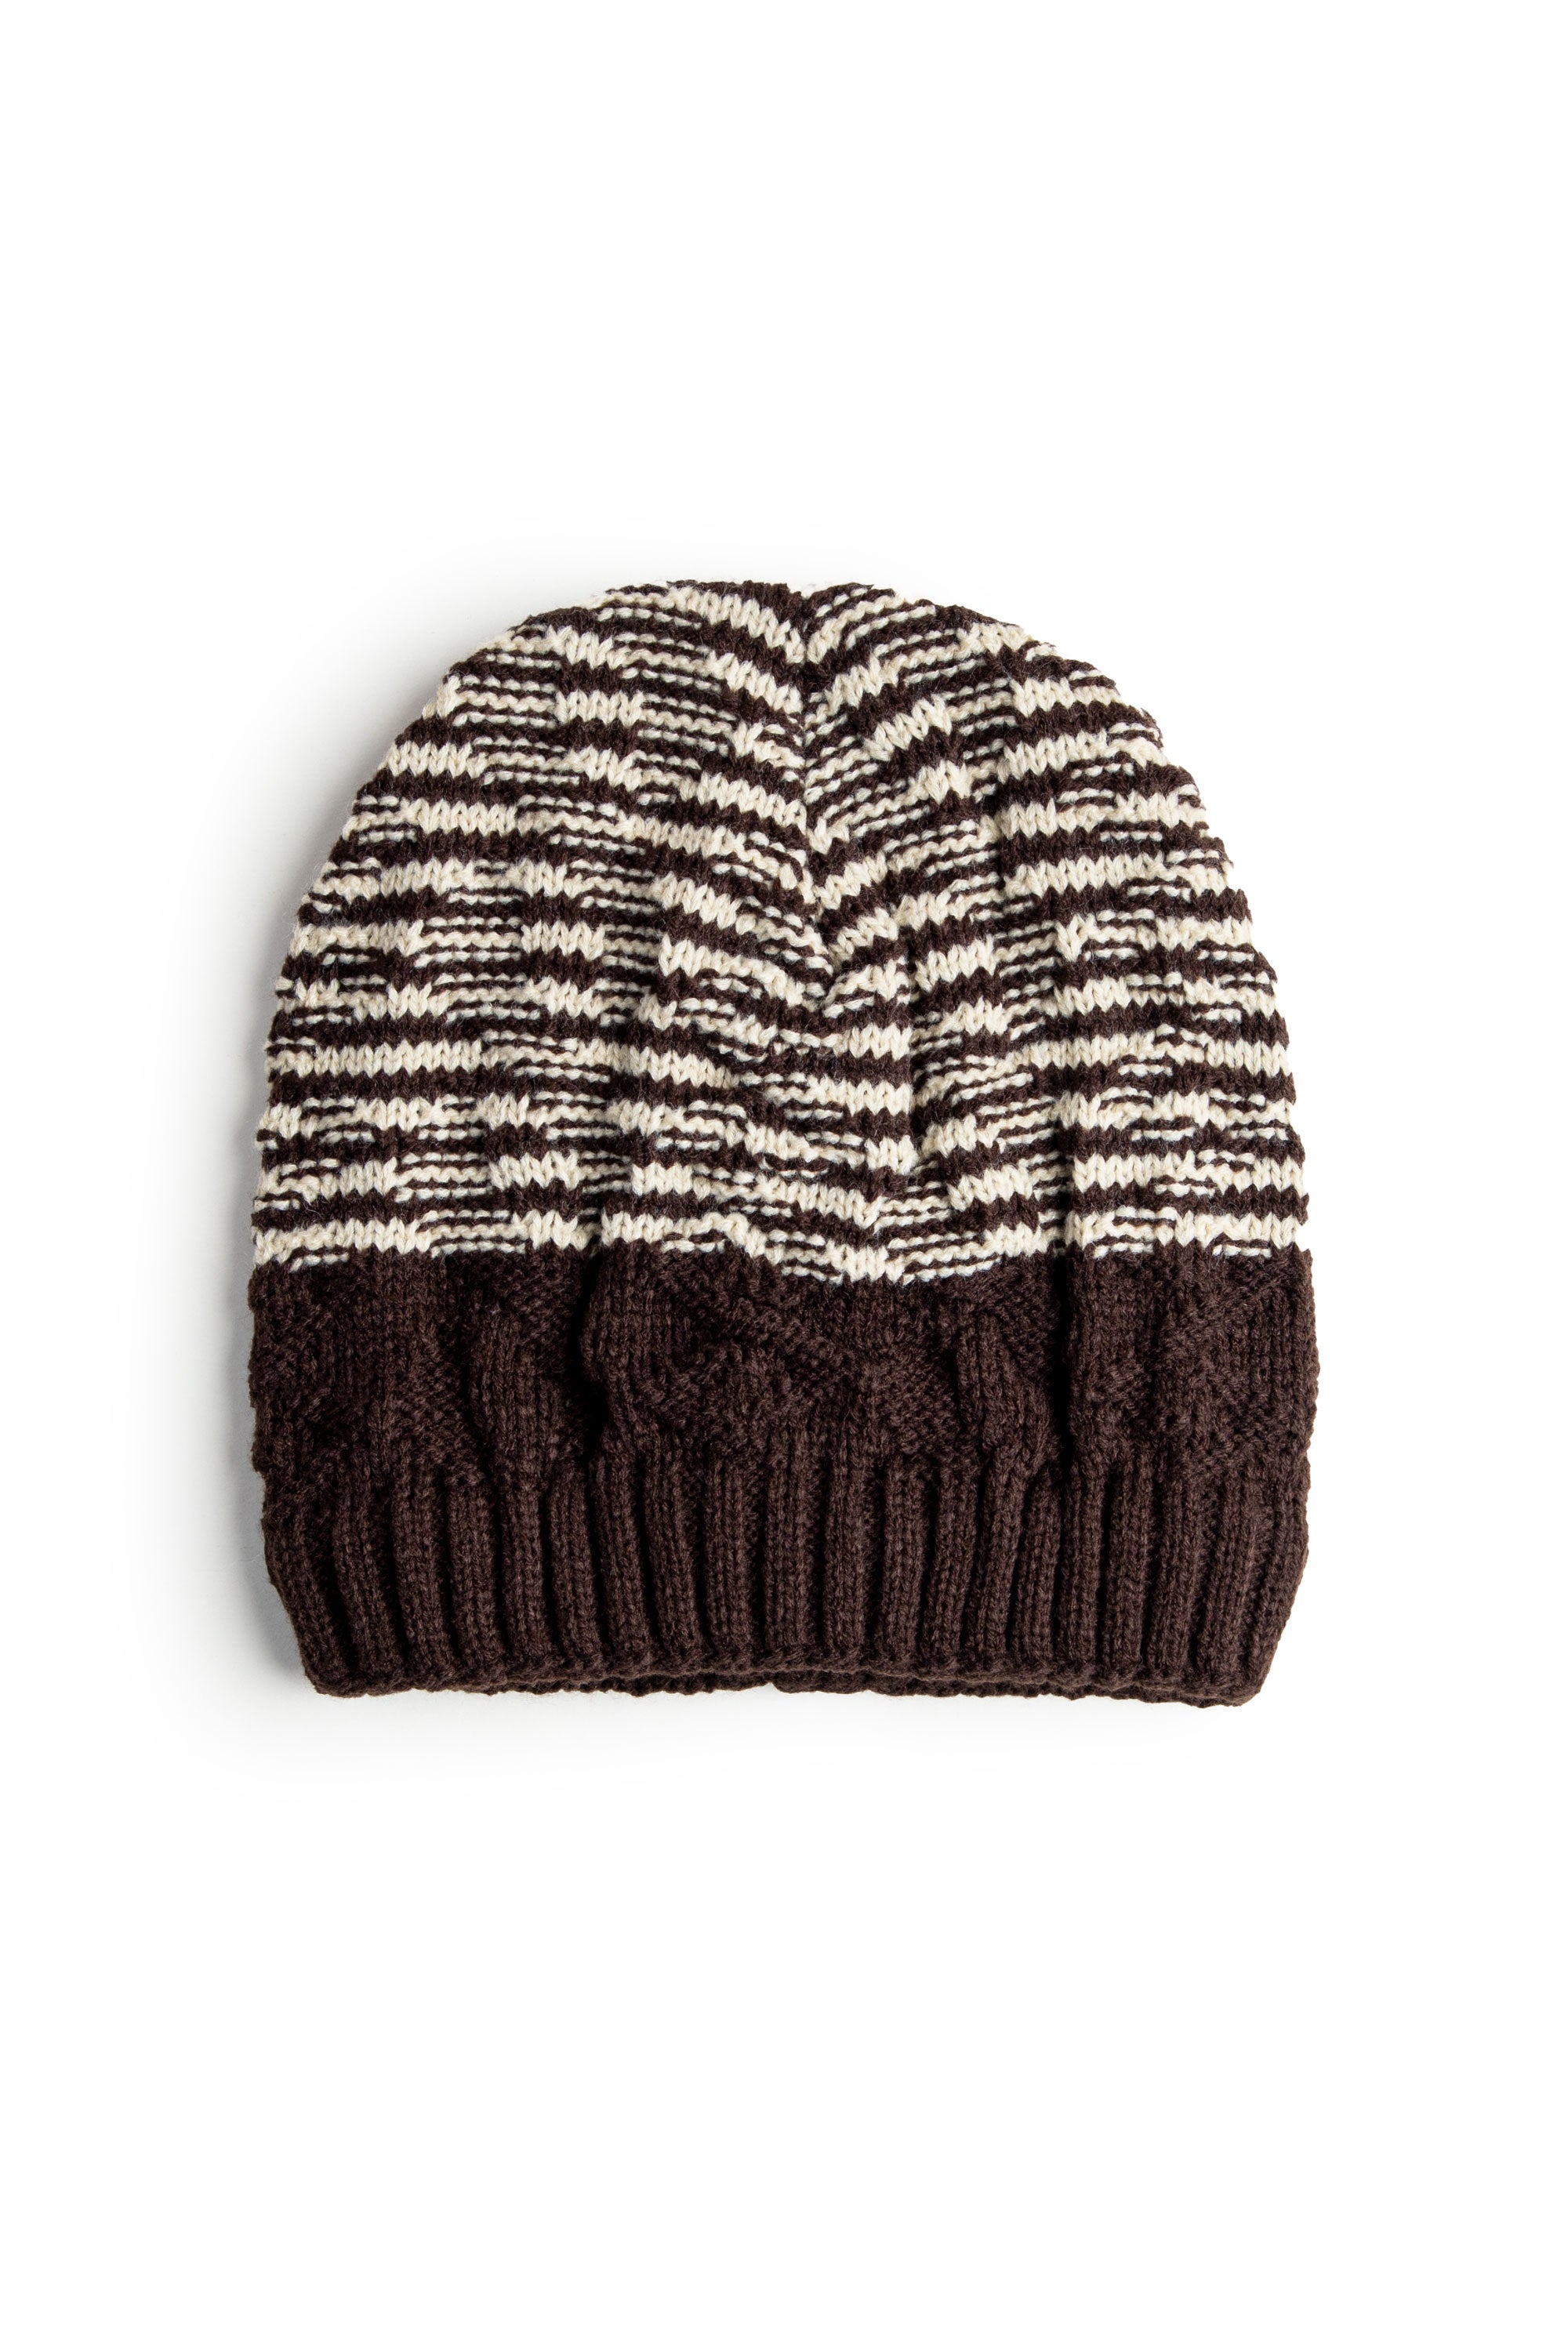 Off White and Brown Woolen Cap